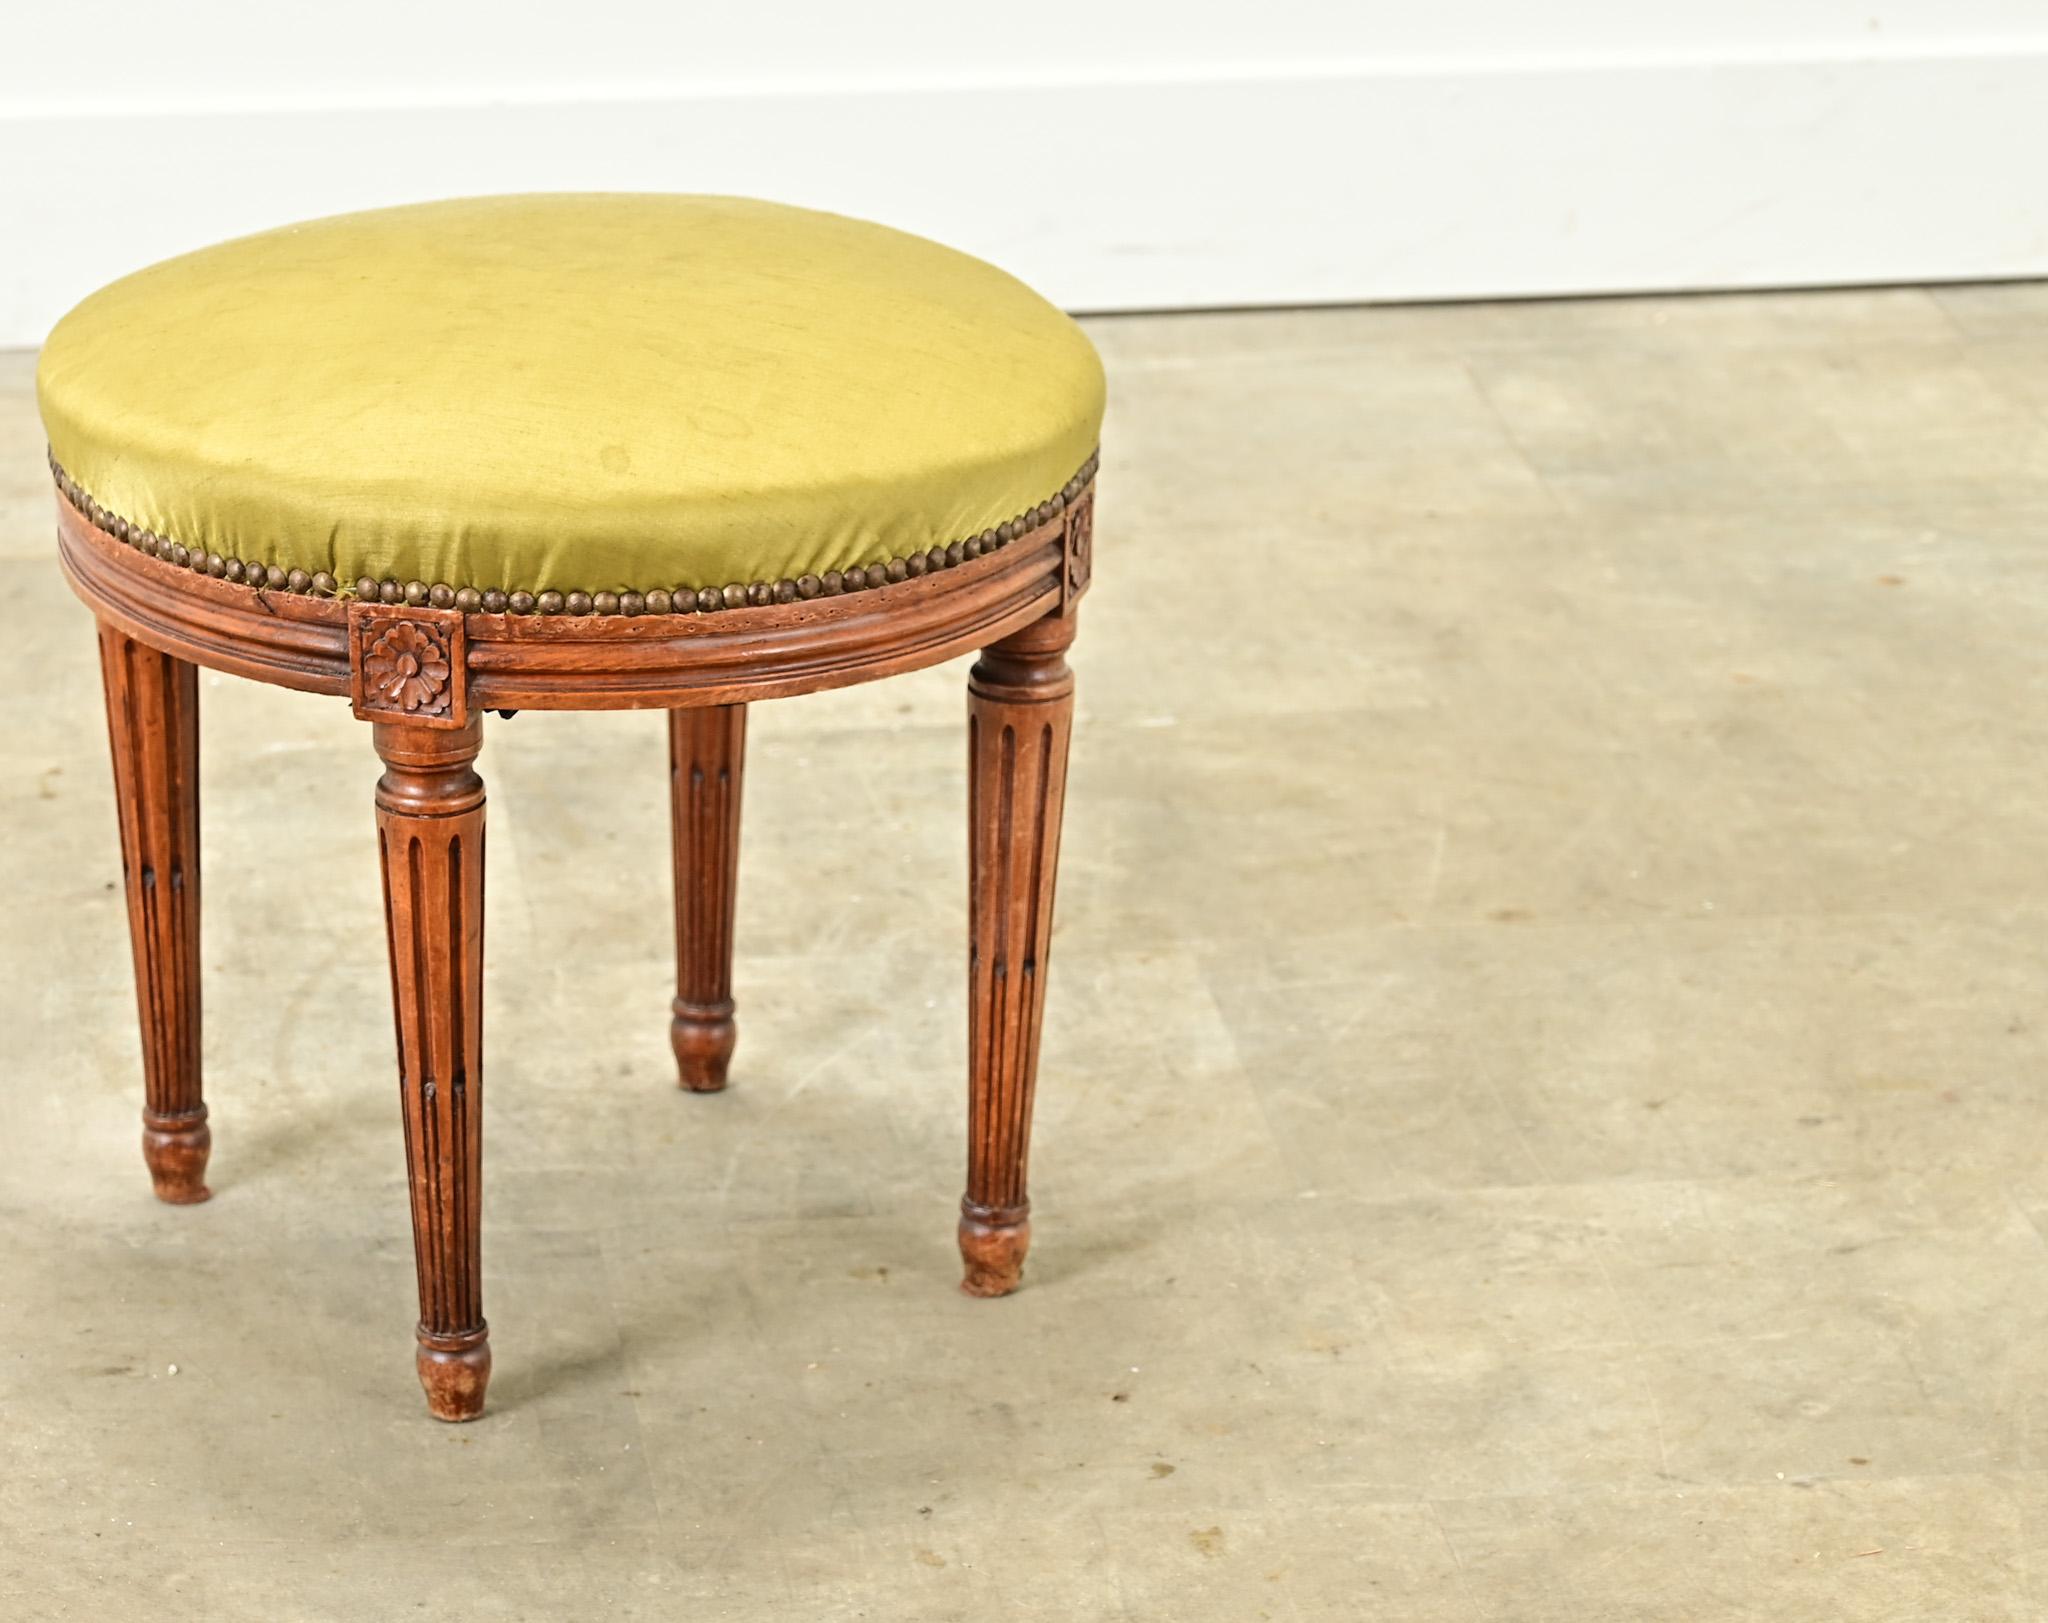 A petite French Louis XVI style stool with worn silk upholstery. The frame has classic carved rosettes with fluted and tapered legs. Be sure to view the detailed images to see the current condition.